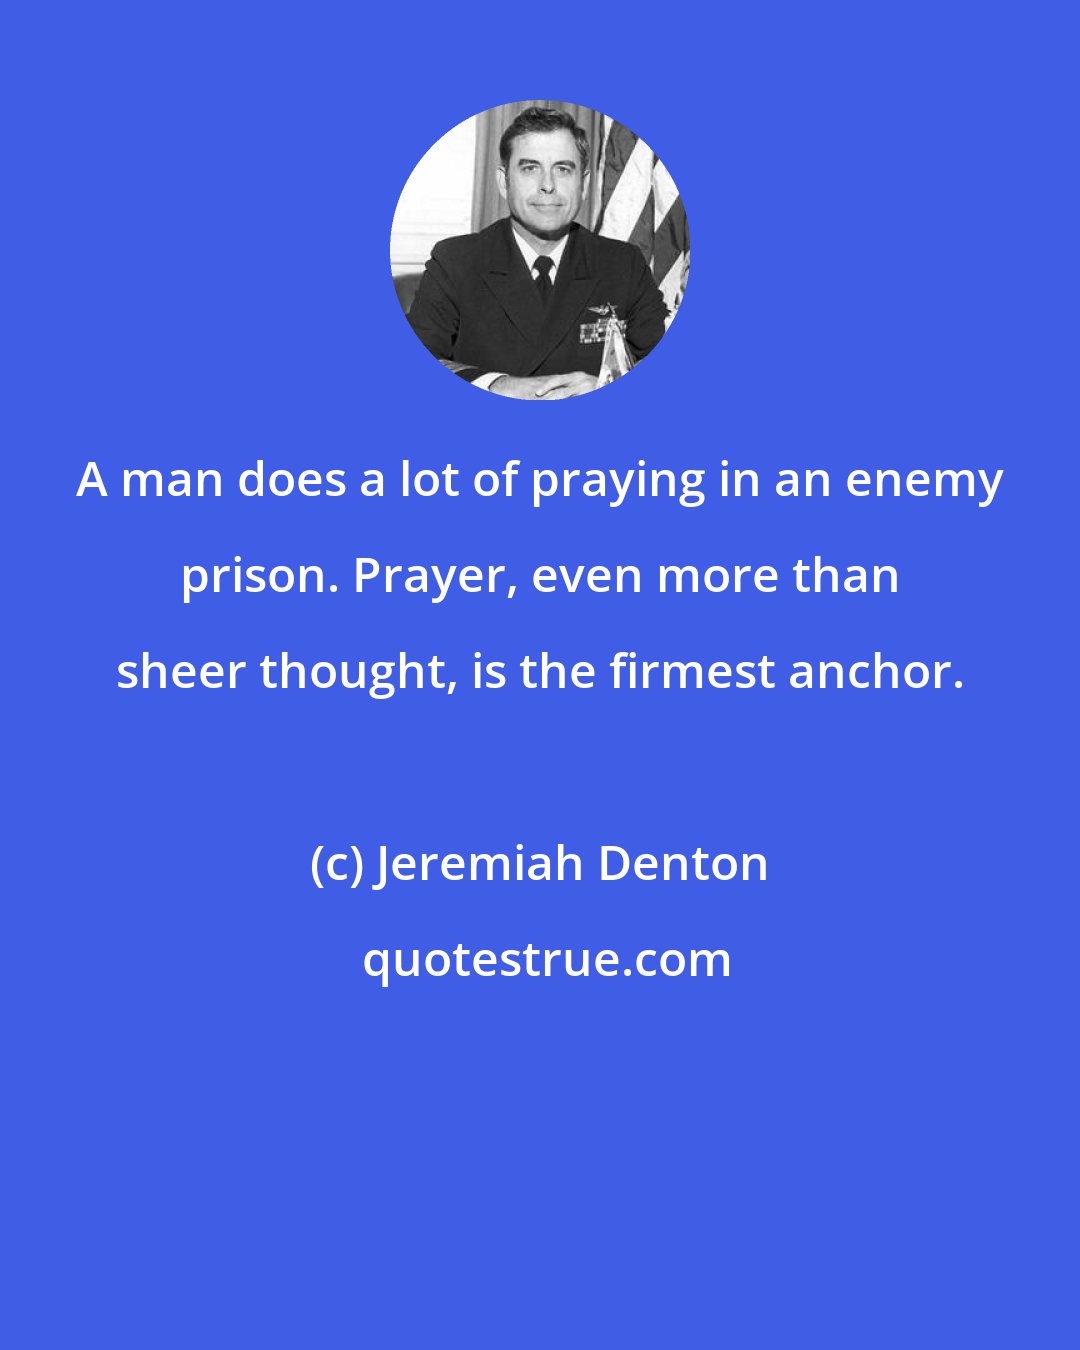 Jeremiah Denton: A man does a lot of praying in an enemy prison. Prayer, even more than sheer thought, is the firmest anchor.